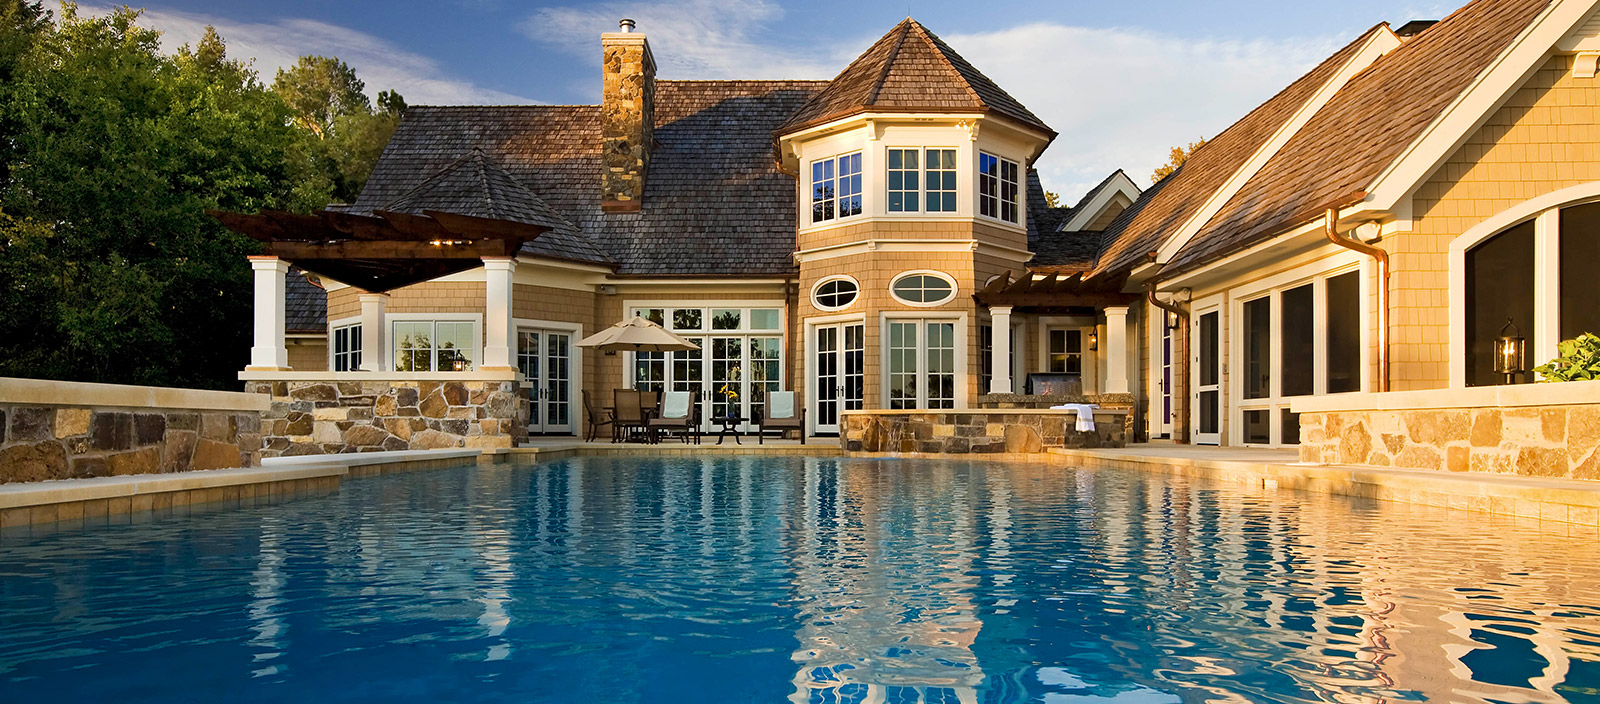 Luxurious swimming pool & hot tub with stone walls